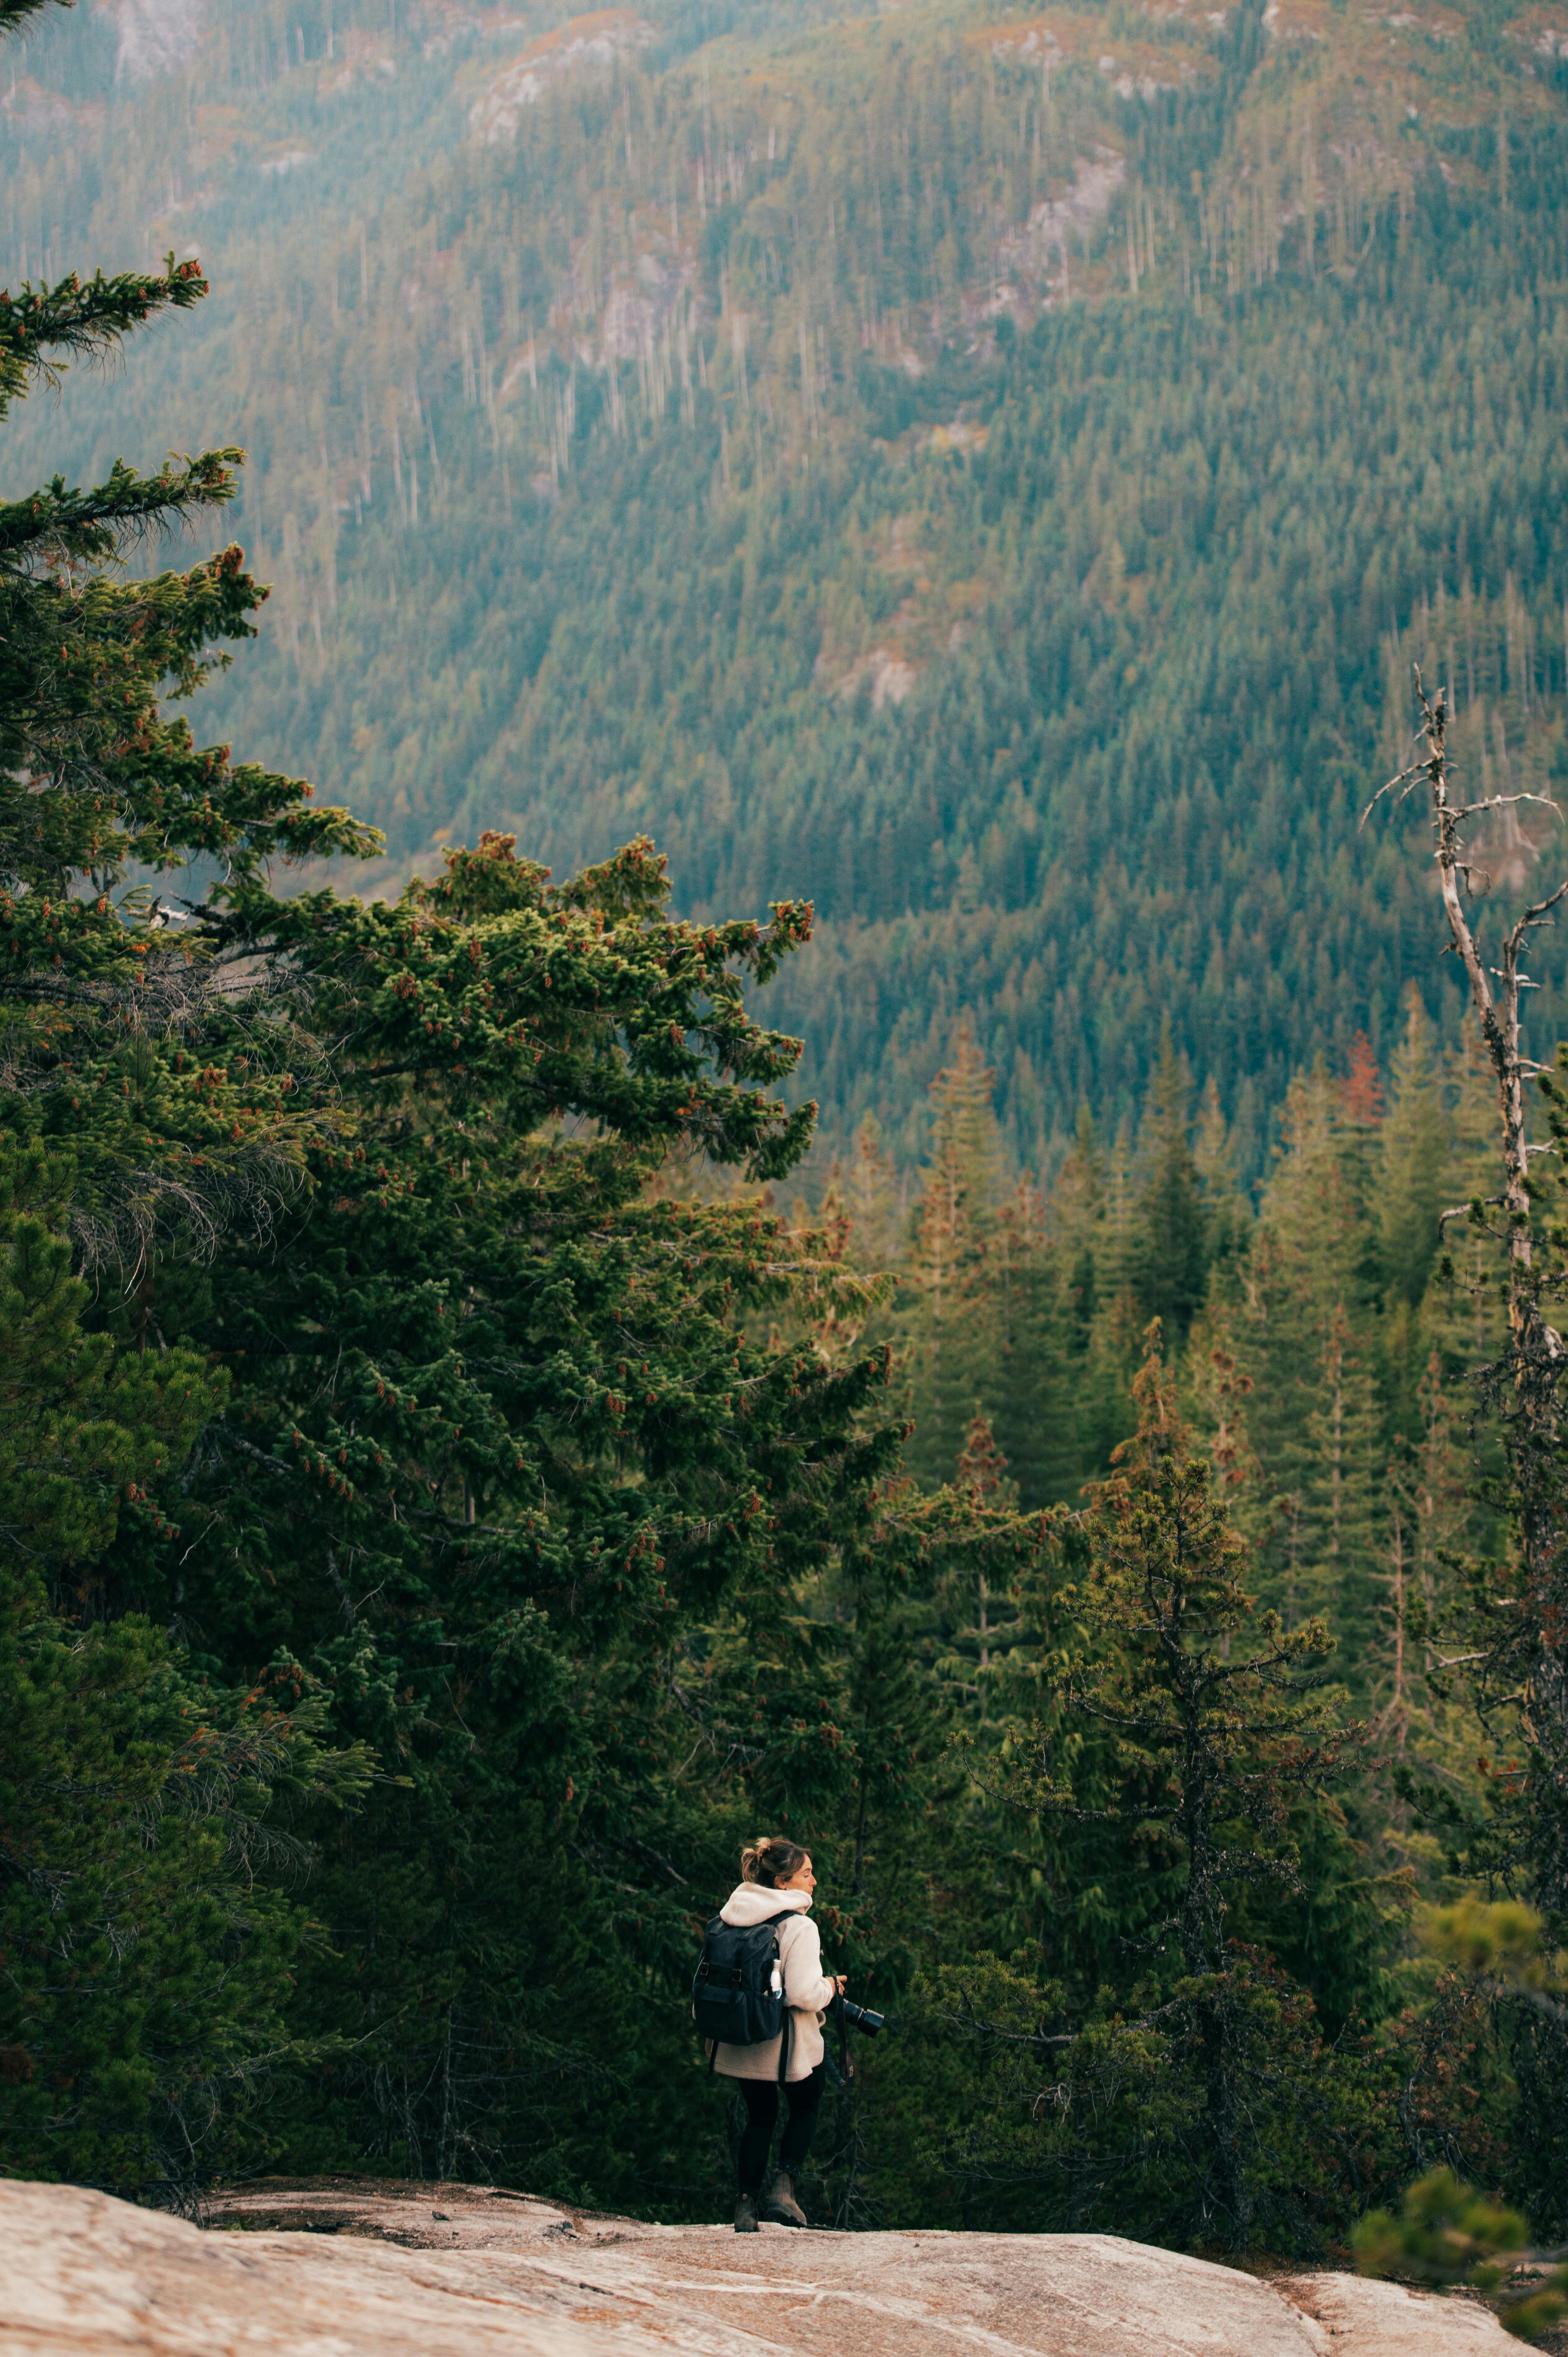 Female Hiker in a Forested Valley · Free Stock Photo